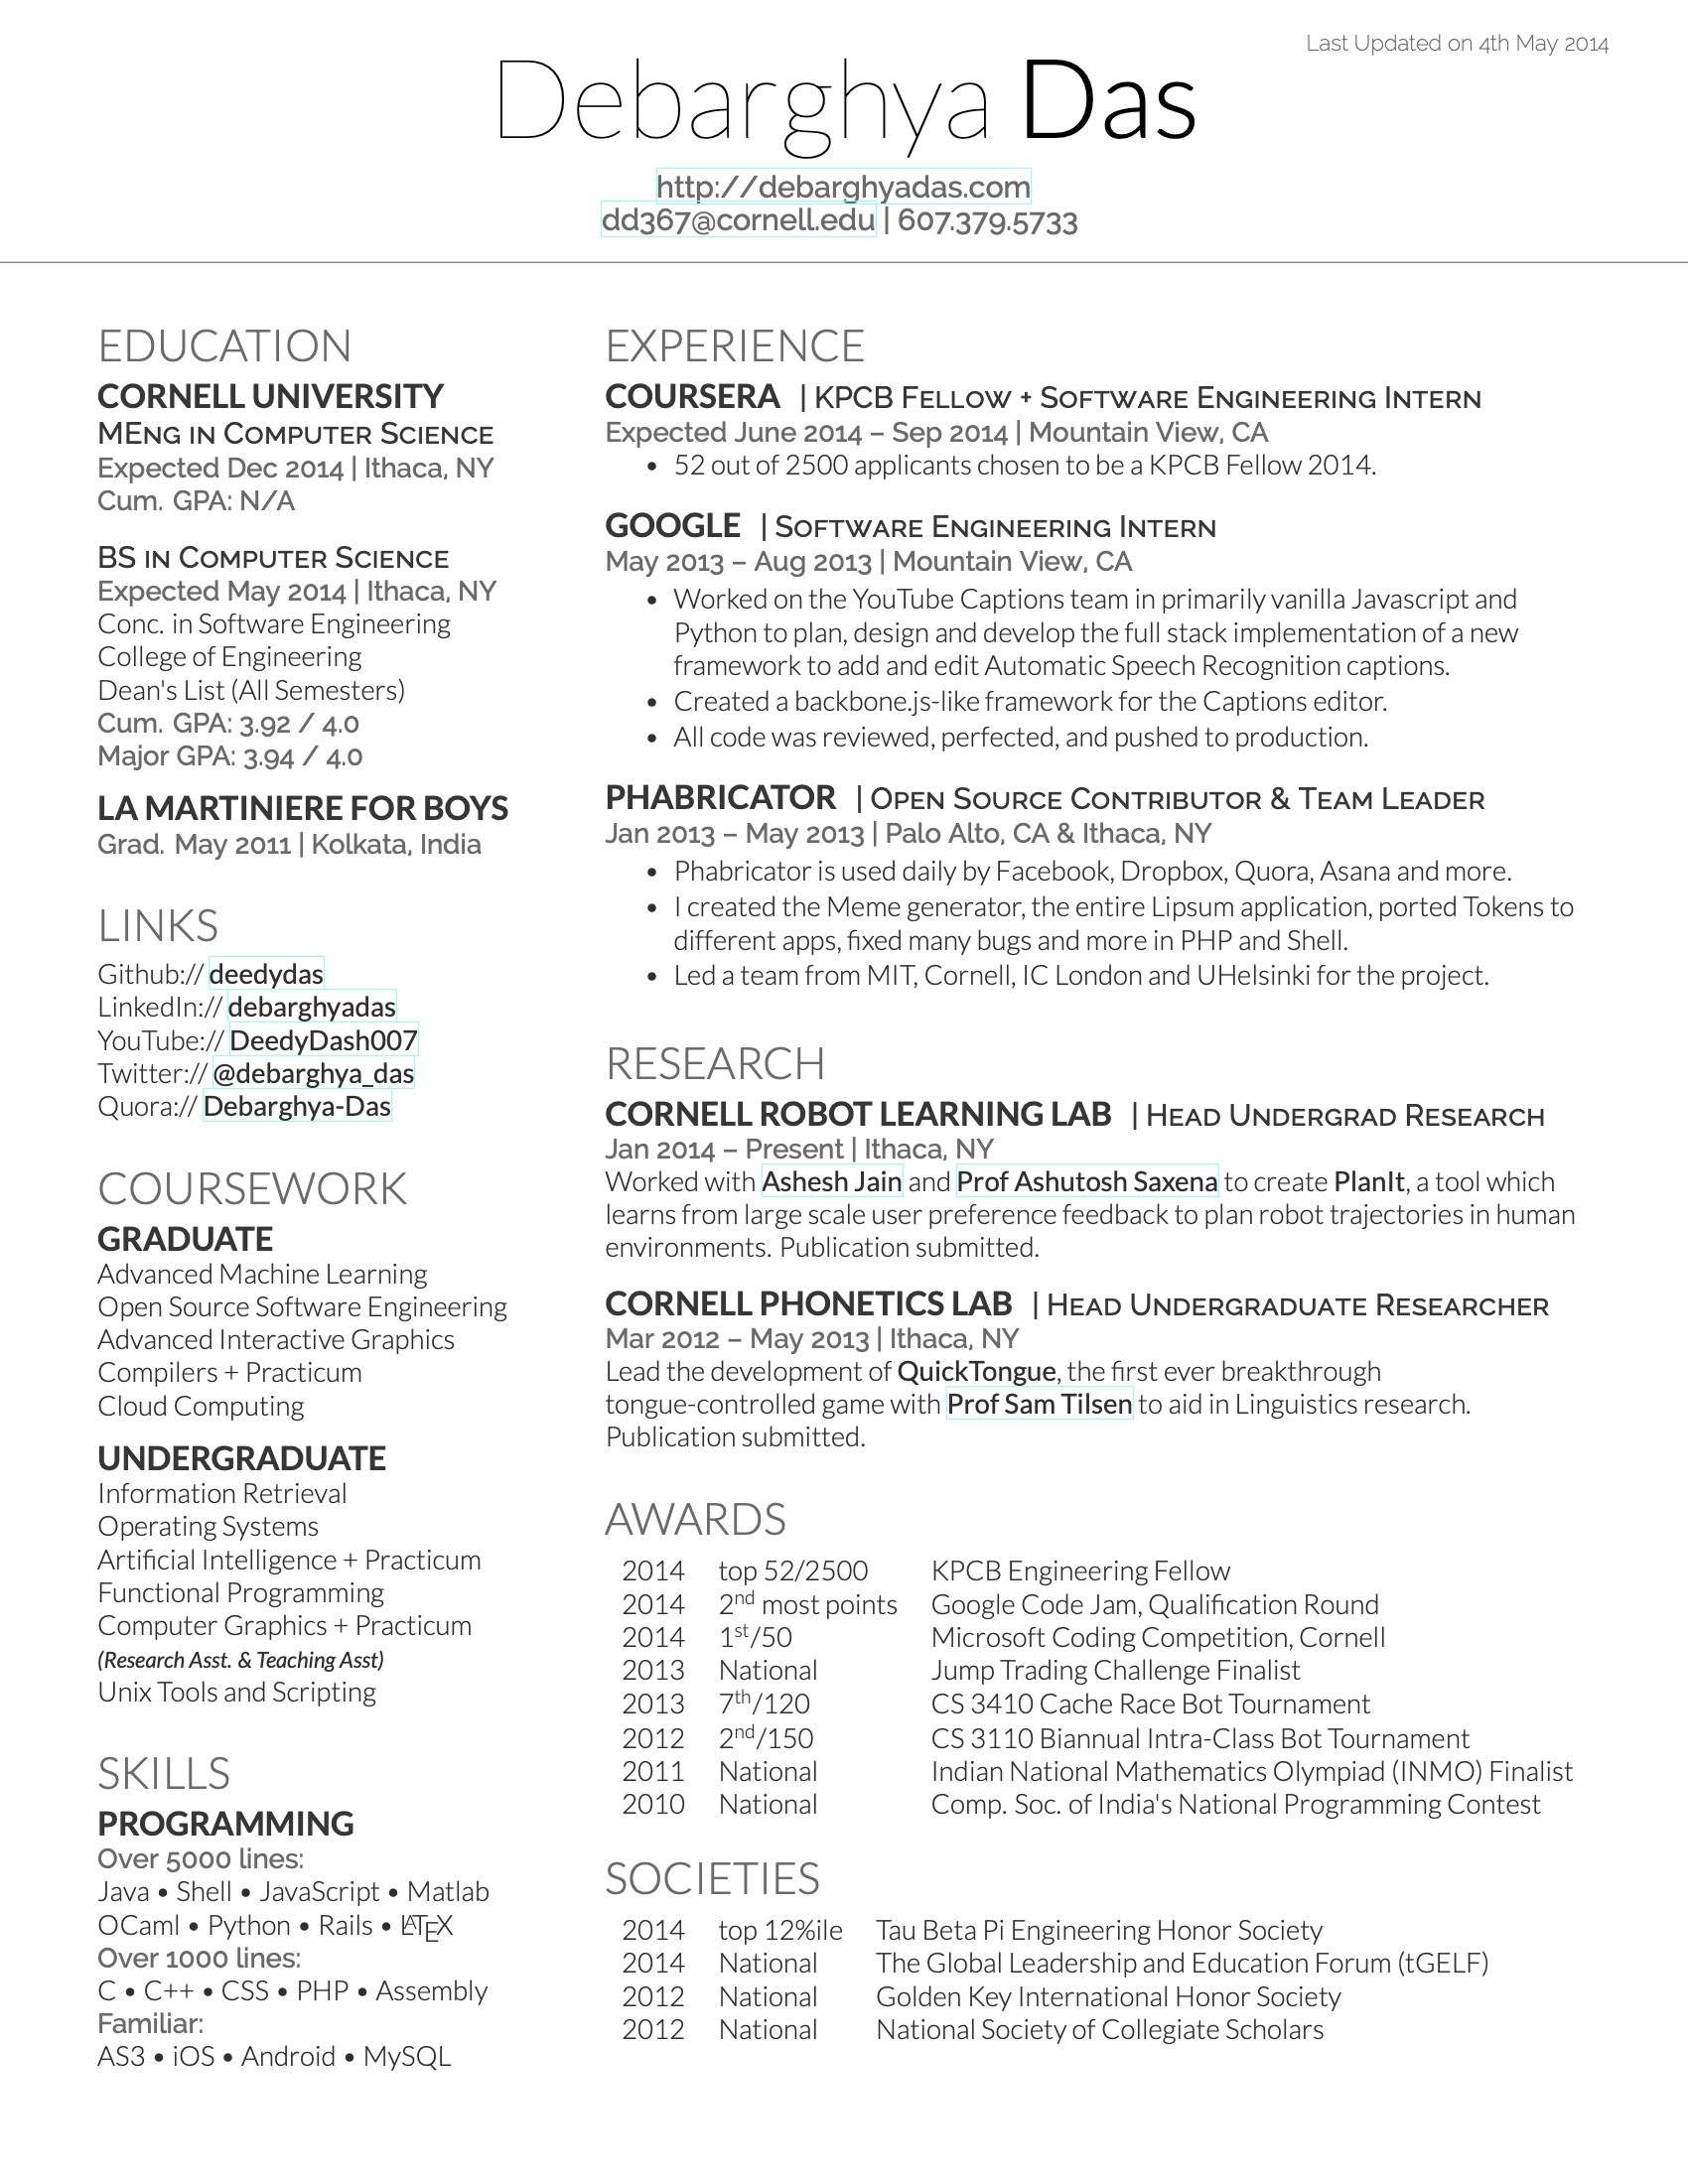 Resume Template for A Lot Of Information Latex Templates – Cvs and Resumes